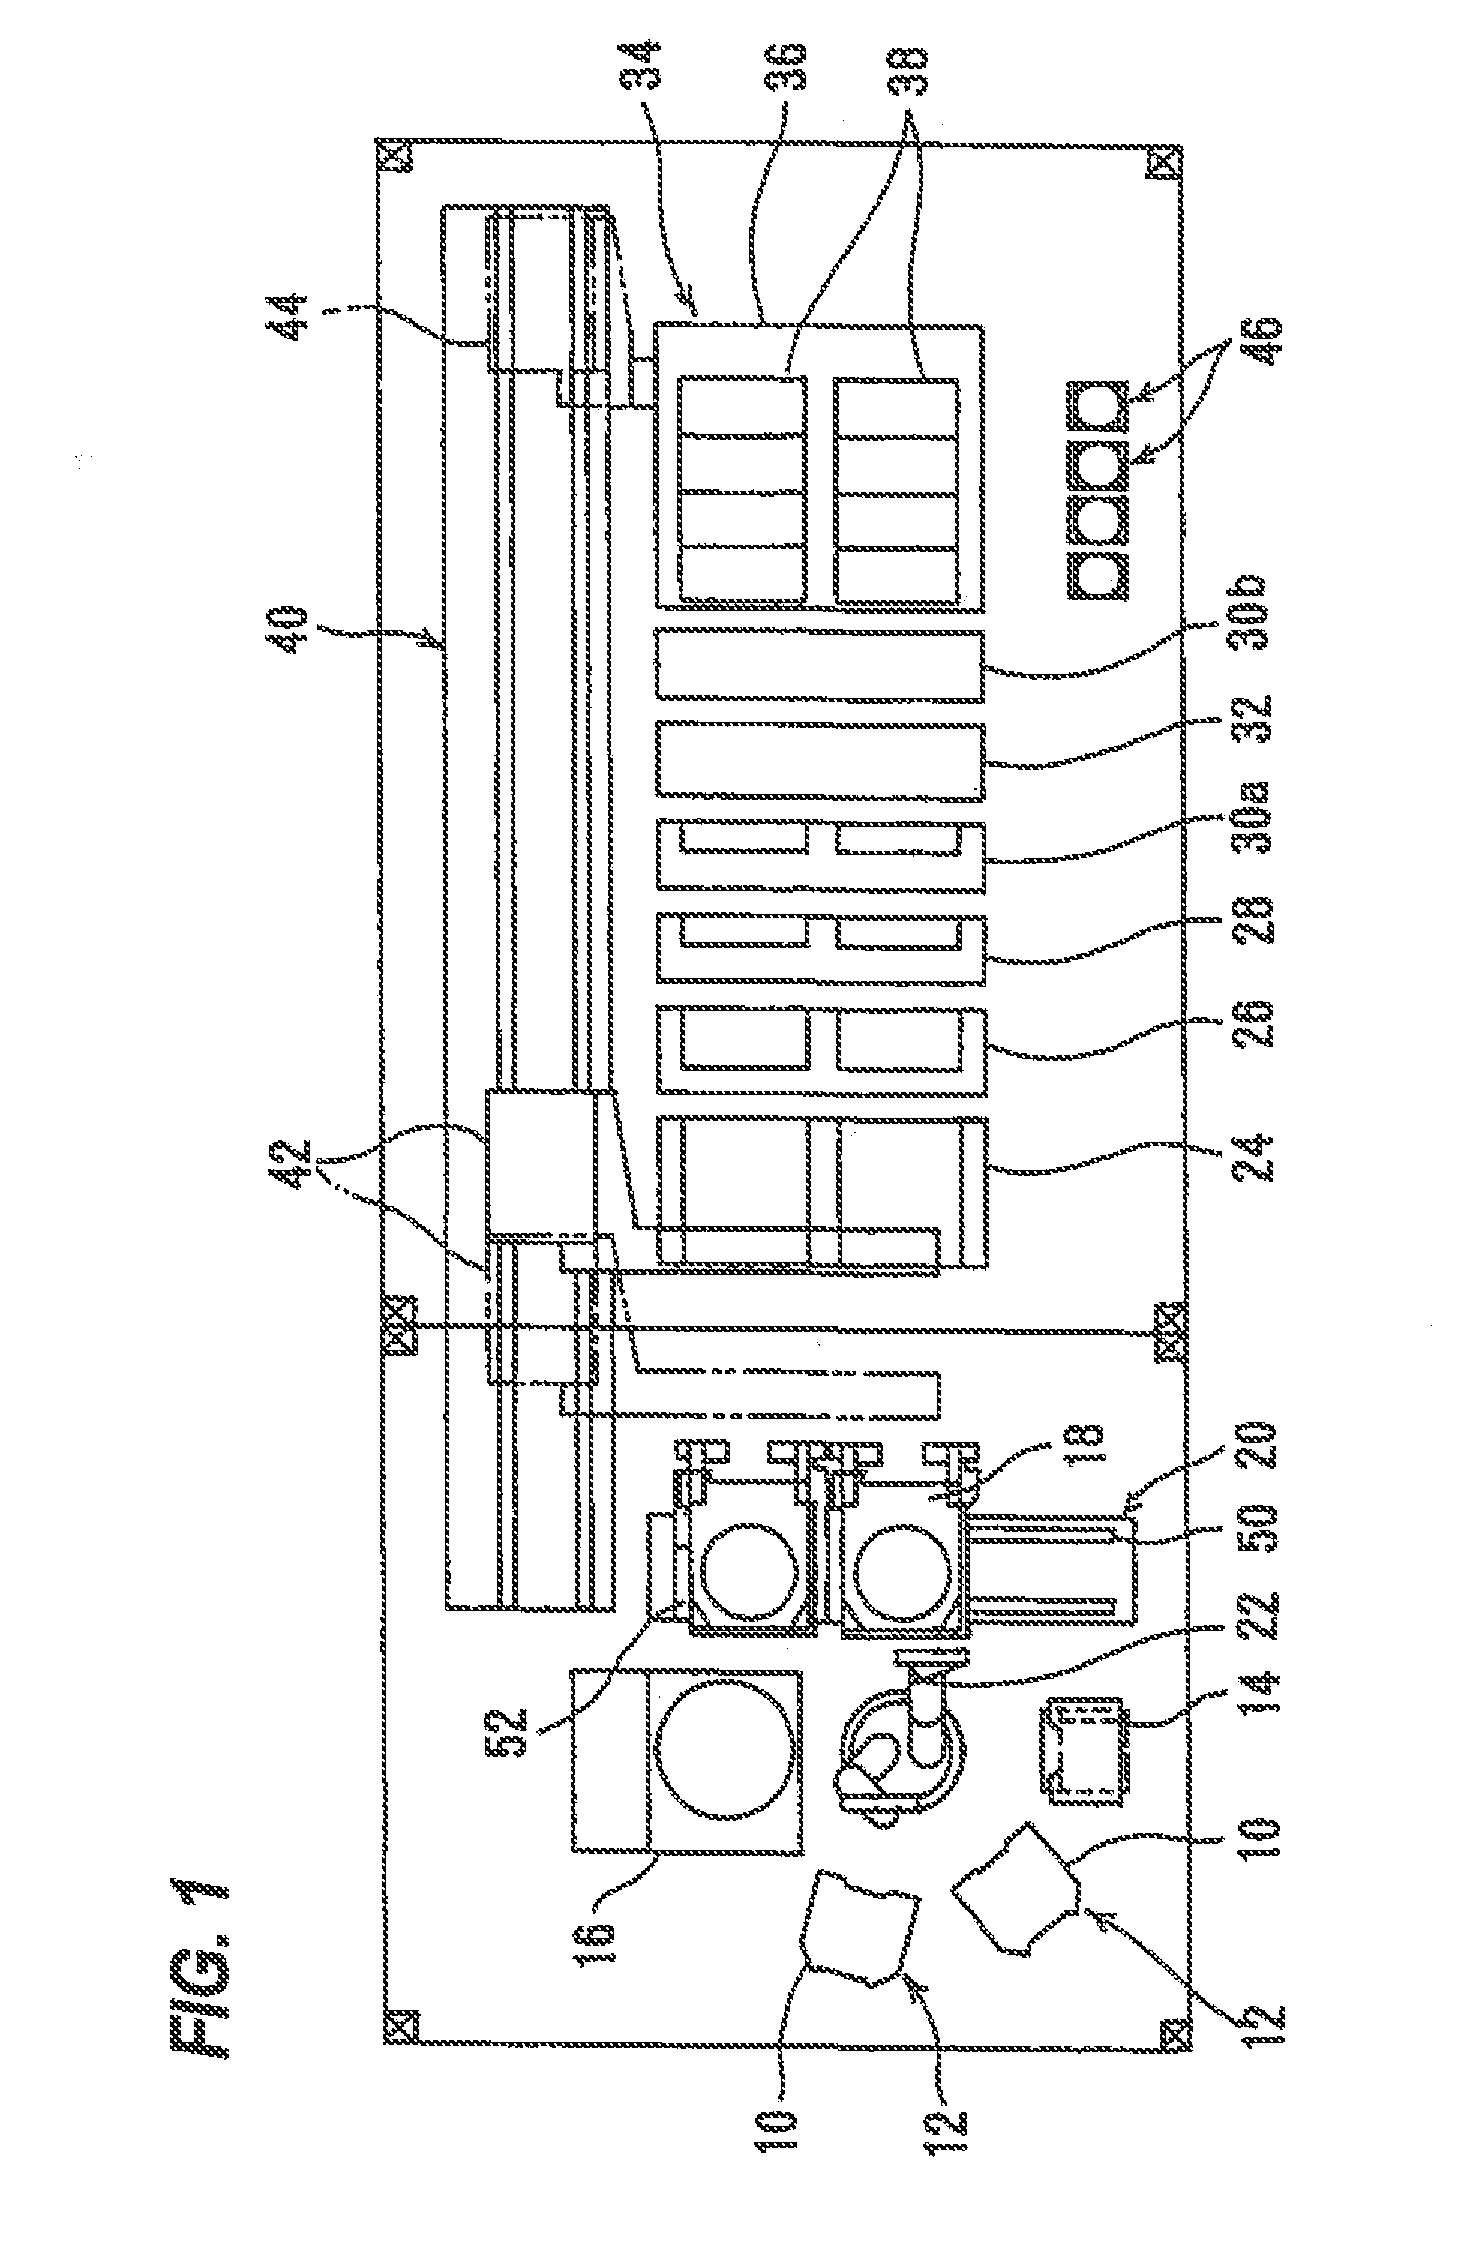 Copper electroplating apparatus